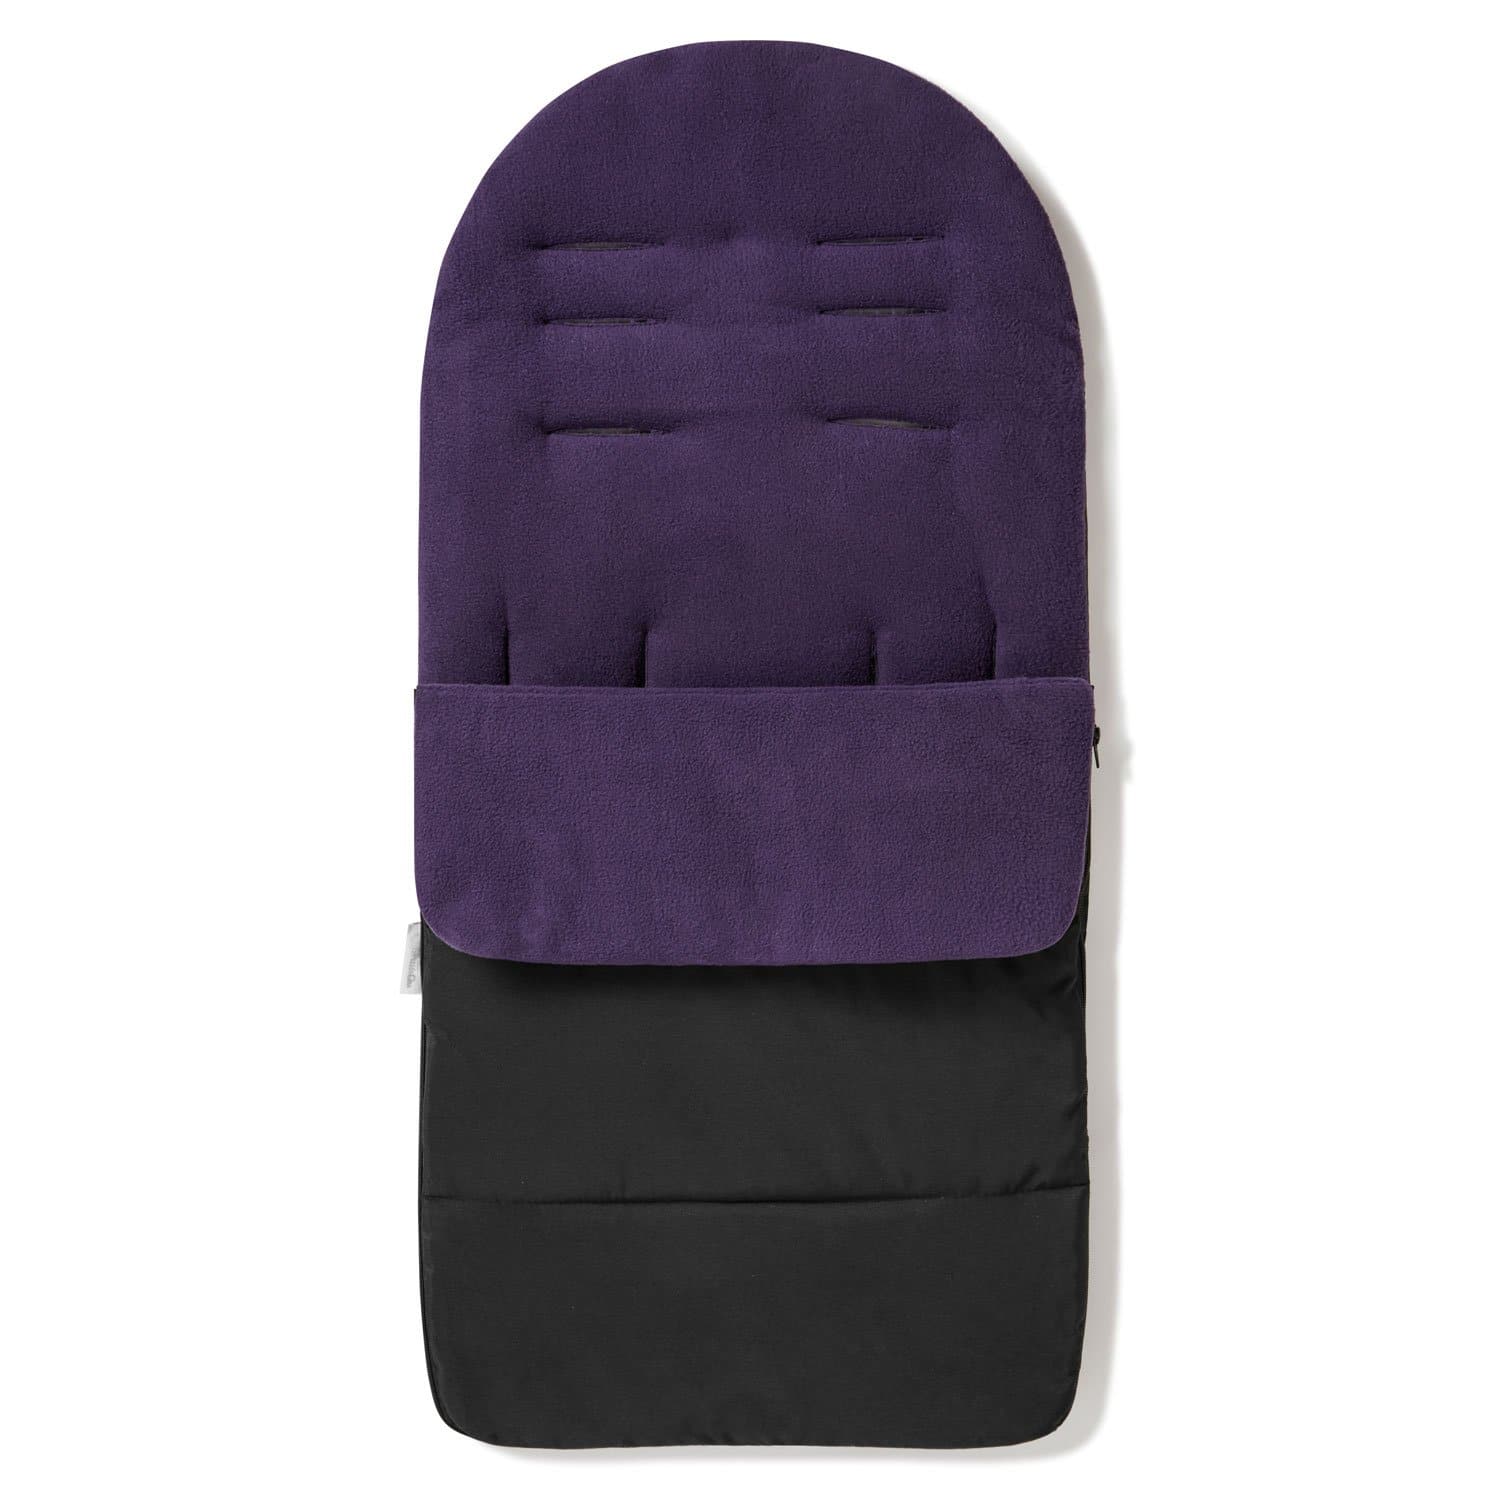 Premium Footmuff / Cosy Toes Compatible with Unilove - Plum Purple / Fits All Models | For Your Little One